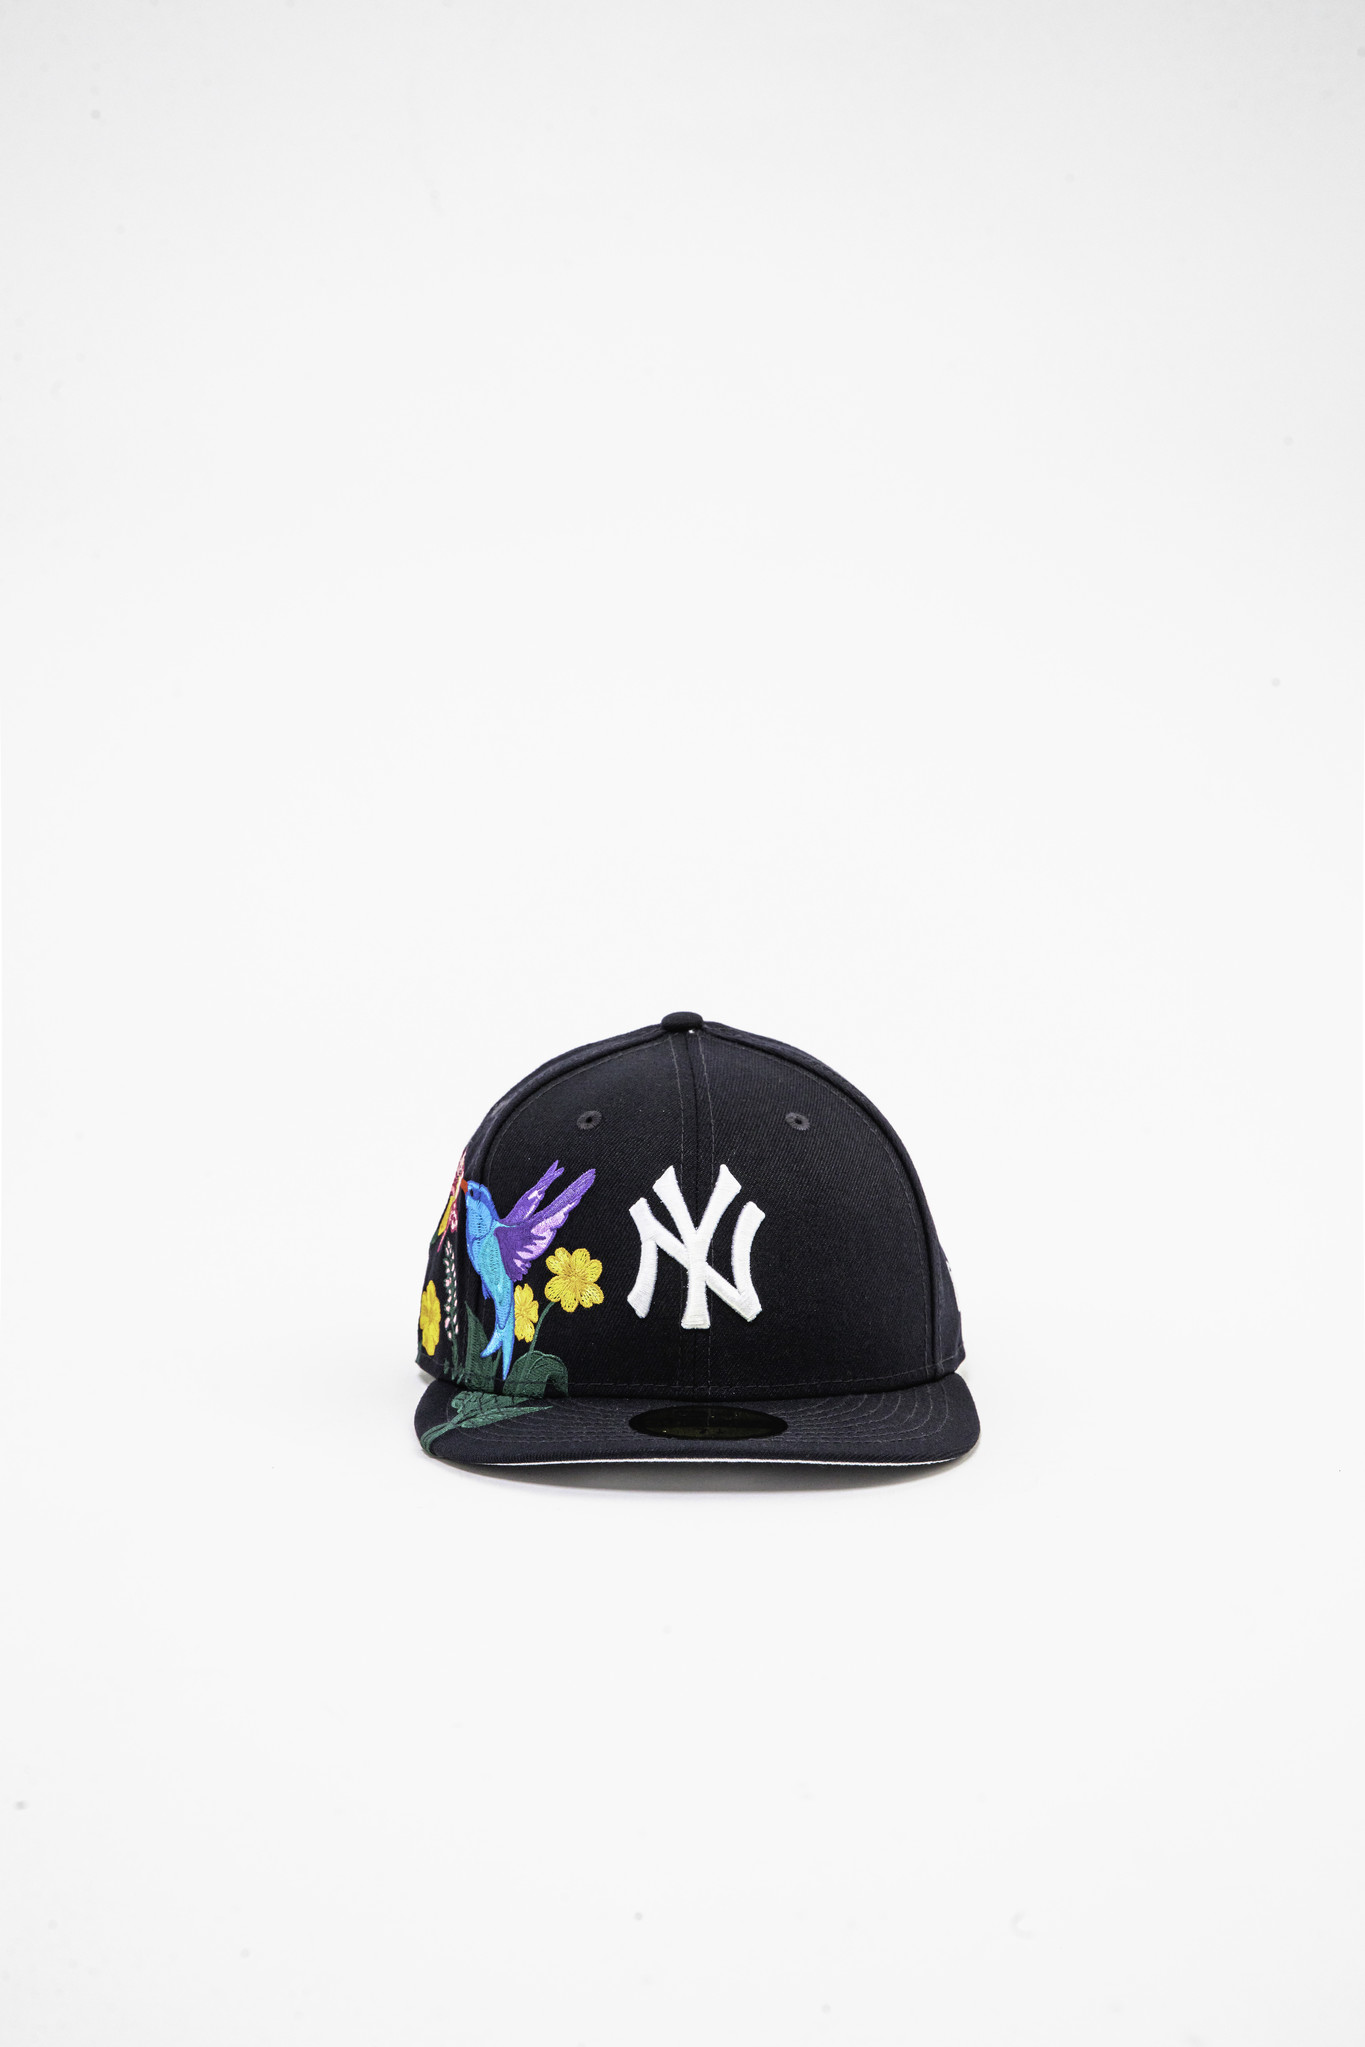 New York Yankees SIDE-BLOOM Navy Fitted Hat by New Era